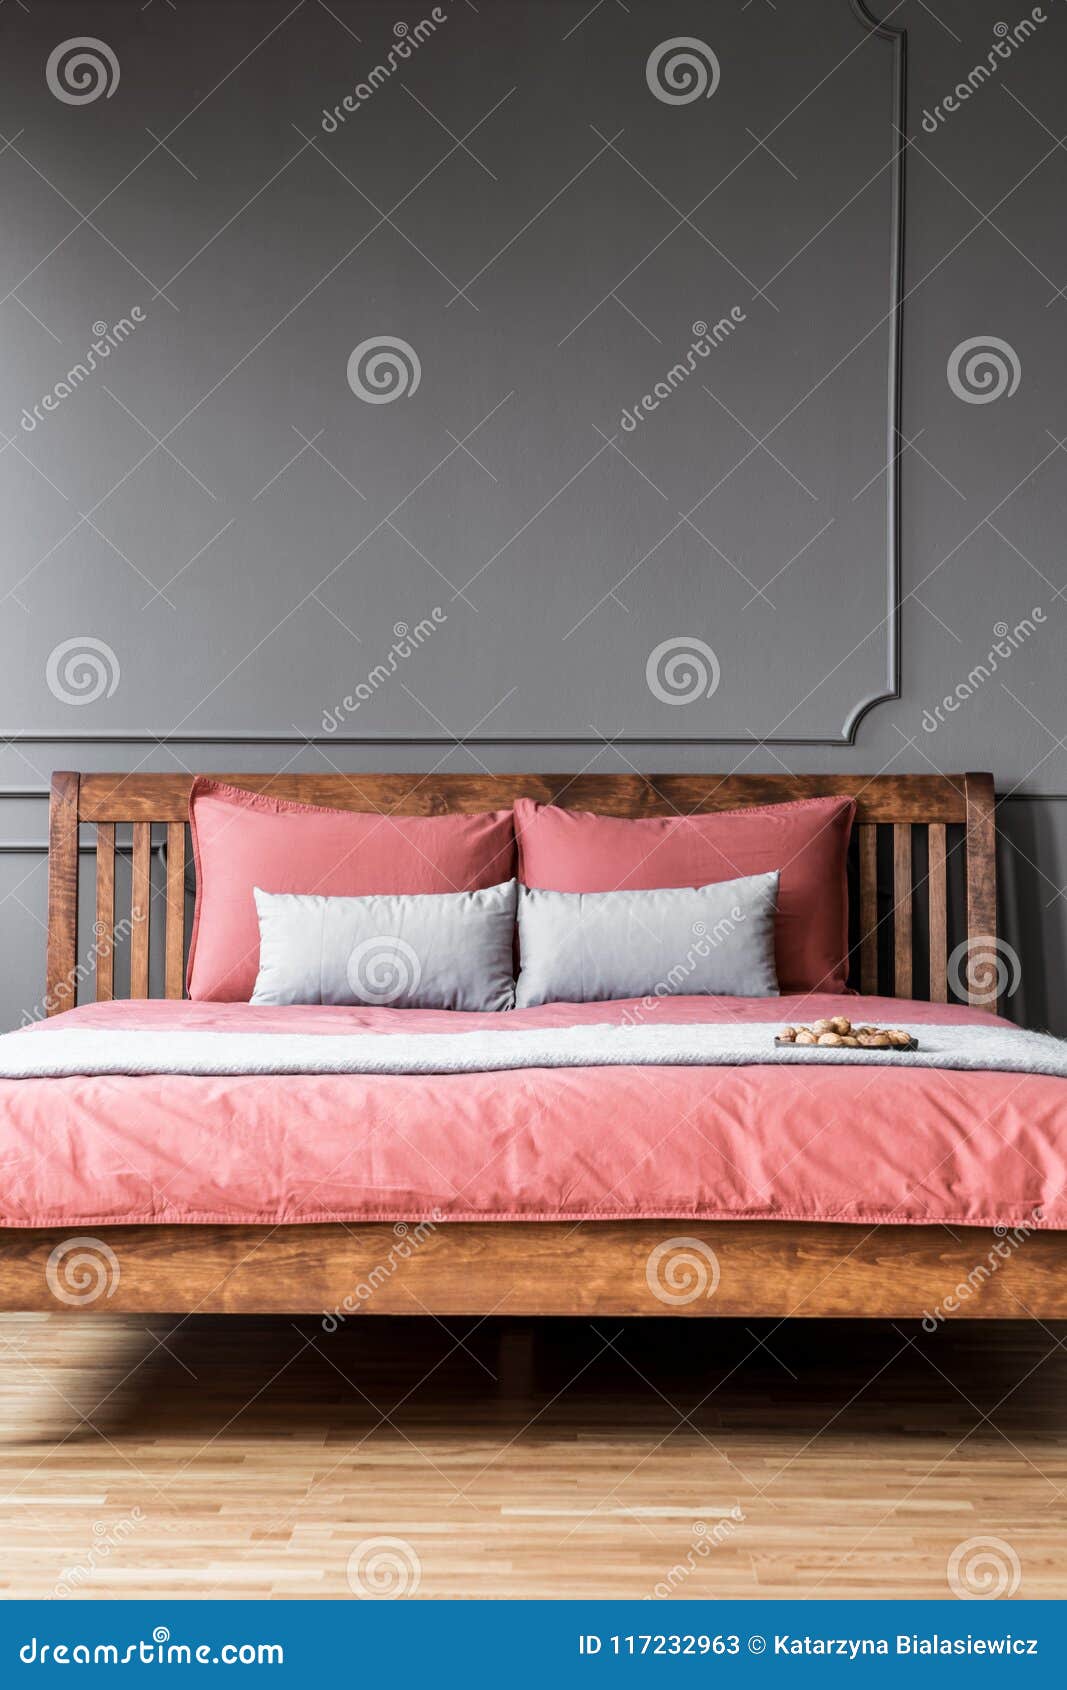 close-up of a simple bed with wooden bedhead and pink sheets in